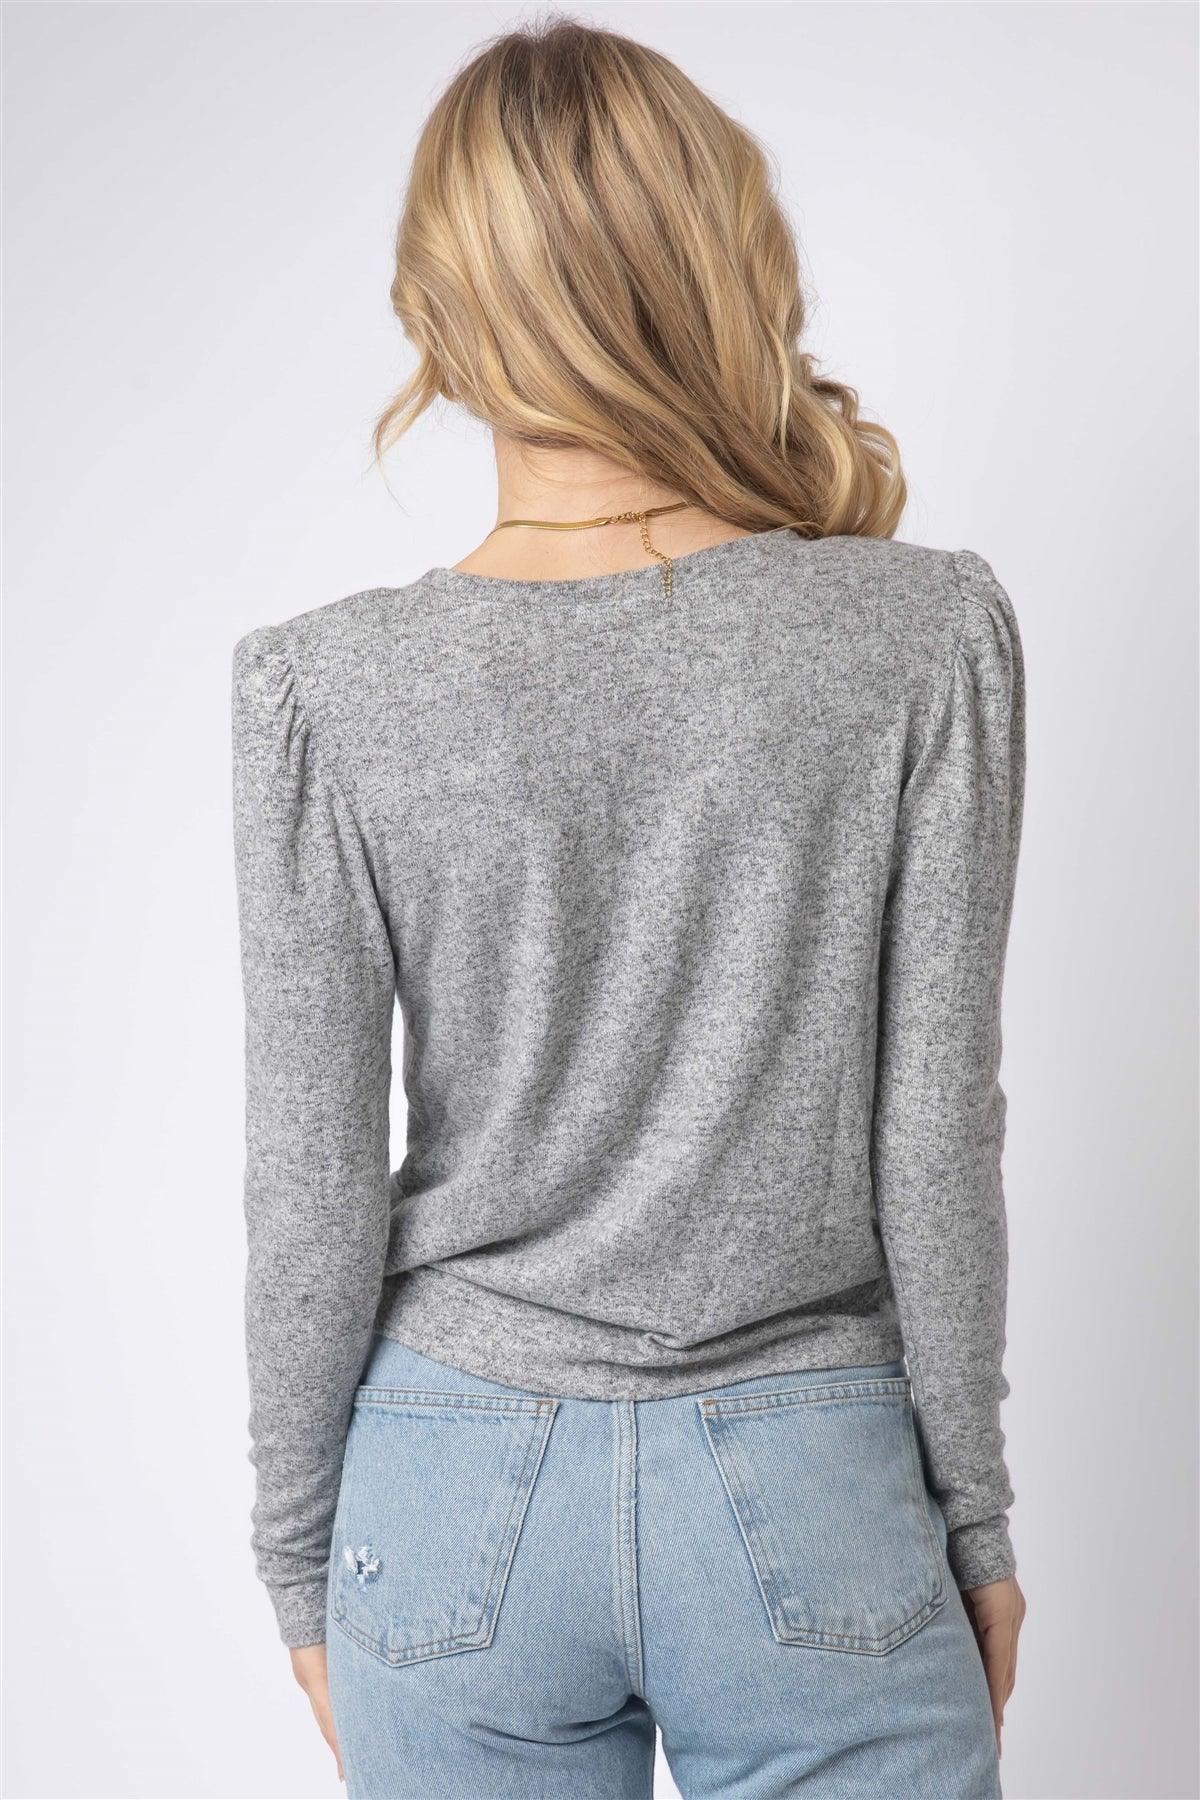 Heather Grey Twisted Detail Shoulder Pad Long Sleeve Top /1-1-1